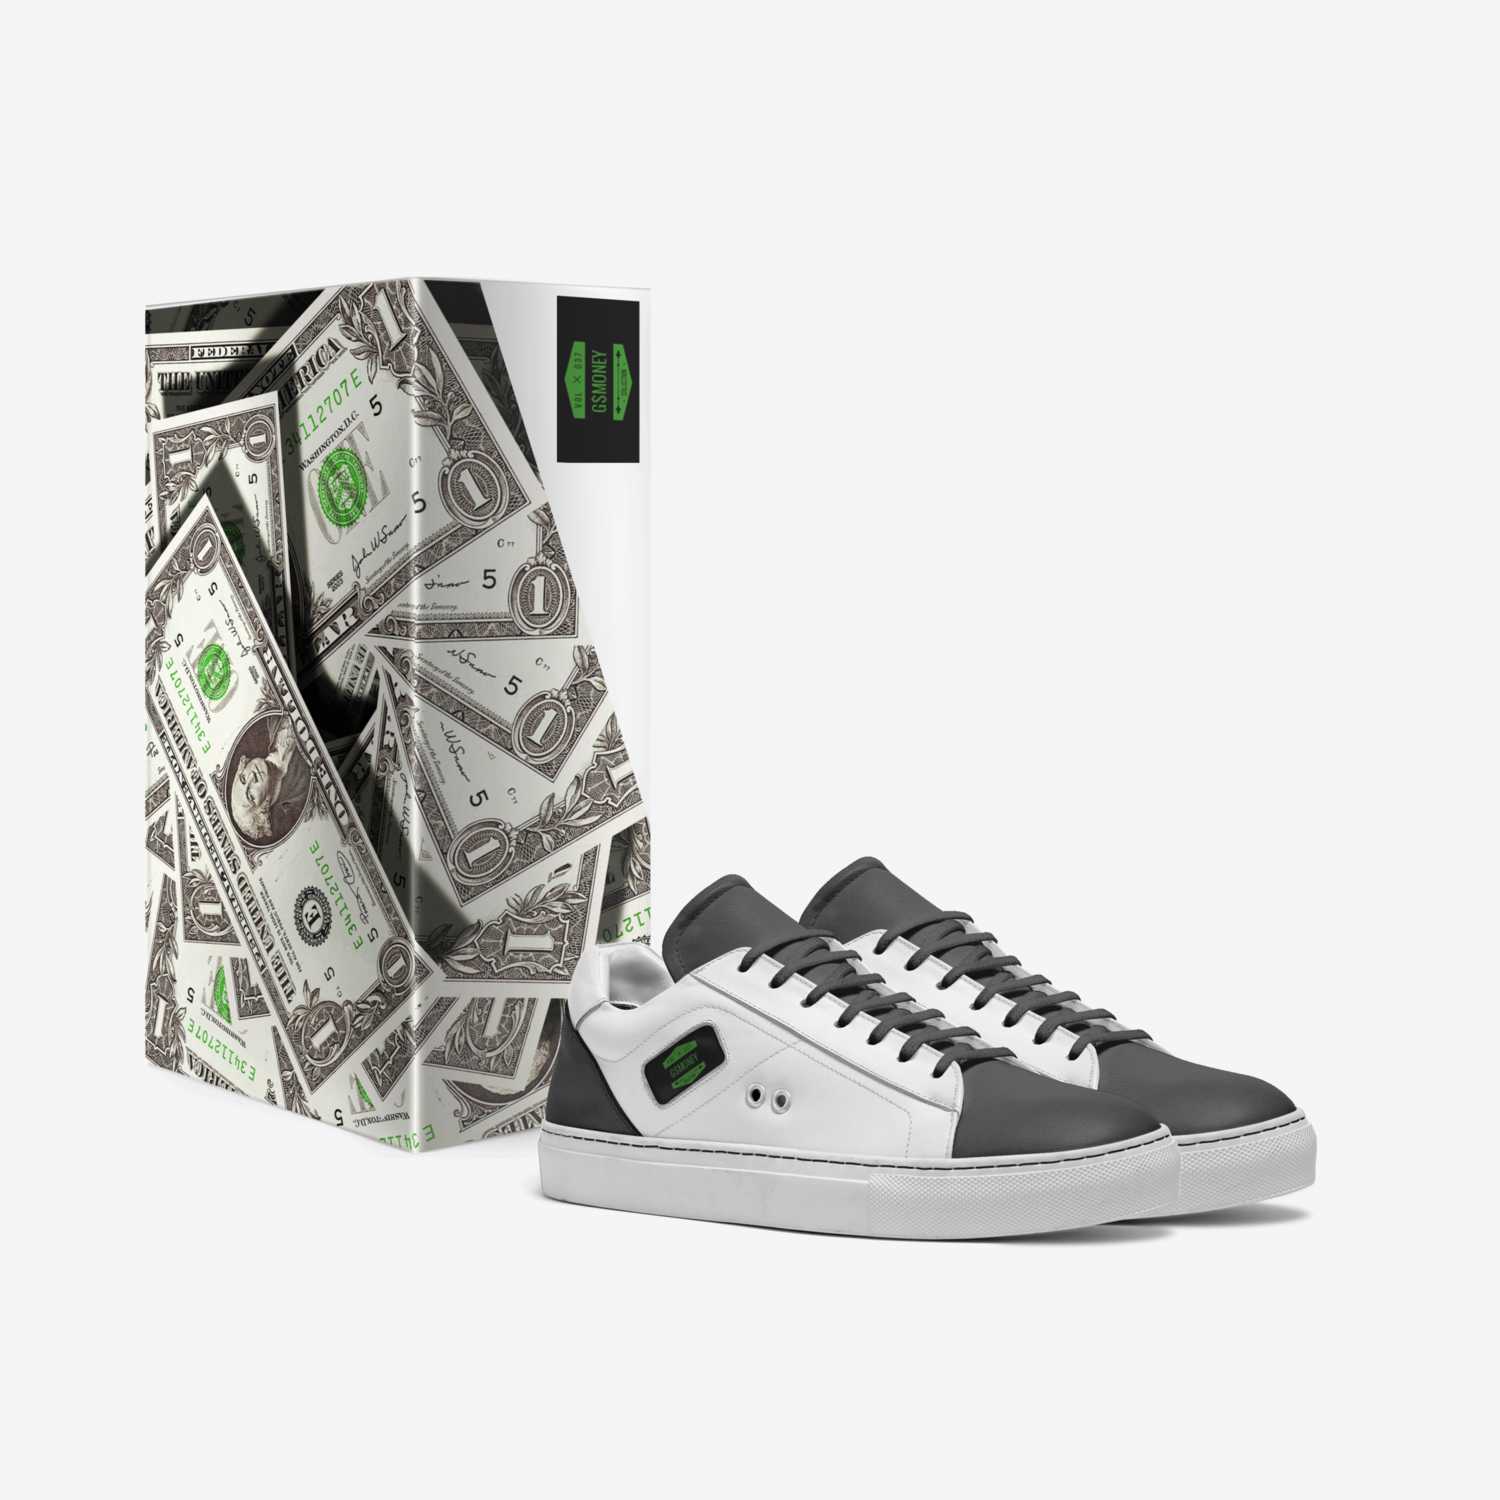 G$MONEY custom made in Italy shoes by Veto Gonzales | Box view